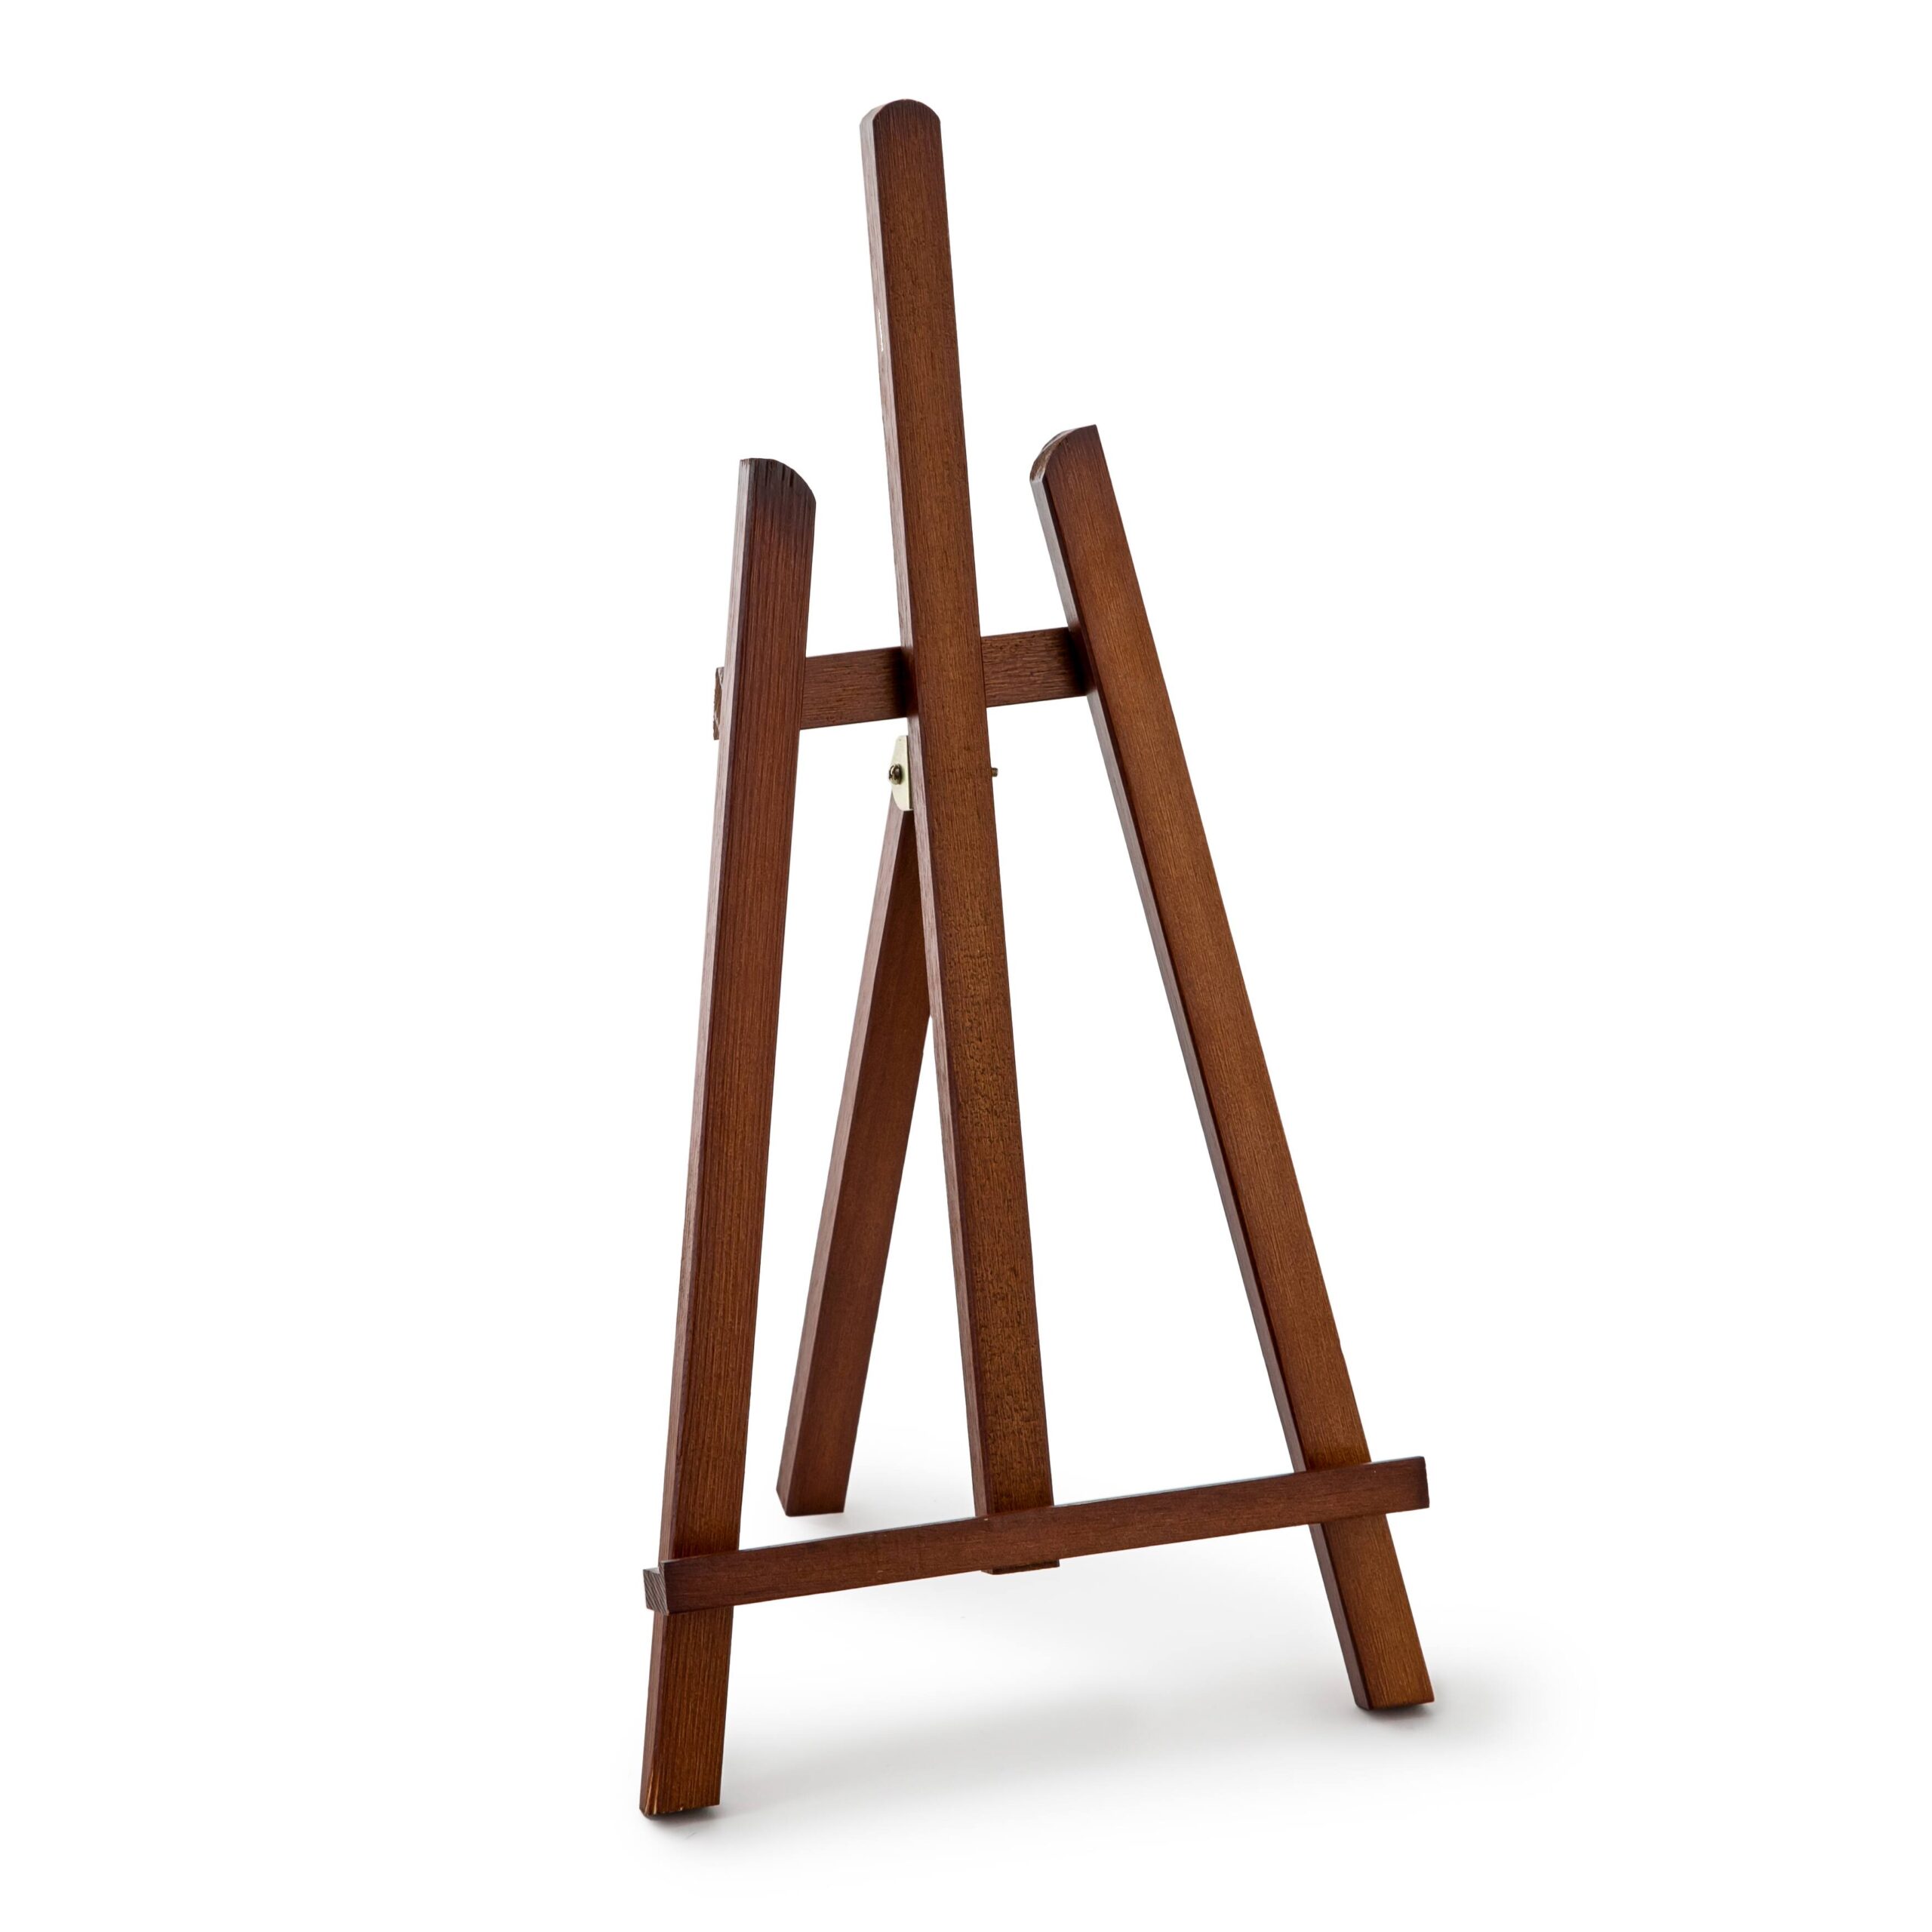 Wood Table Top Easels, Bulk Easel Stands for Painting Canvases